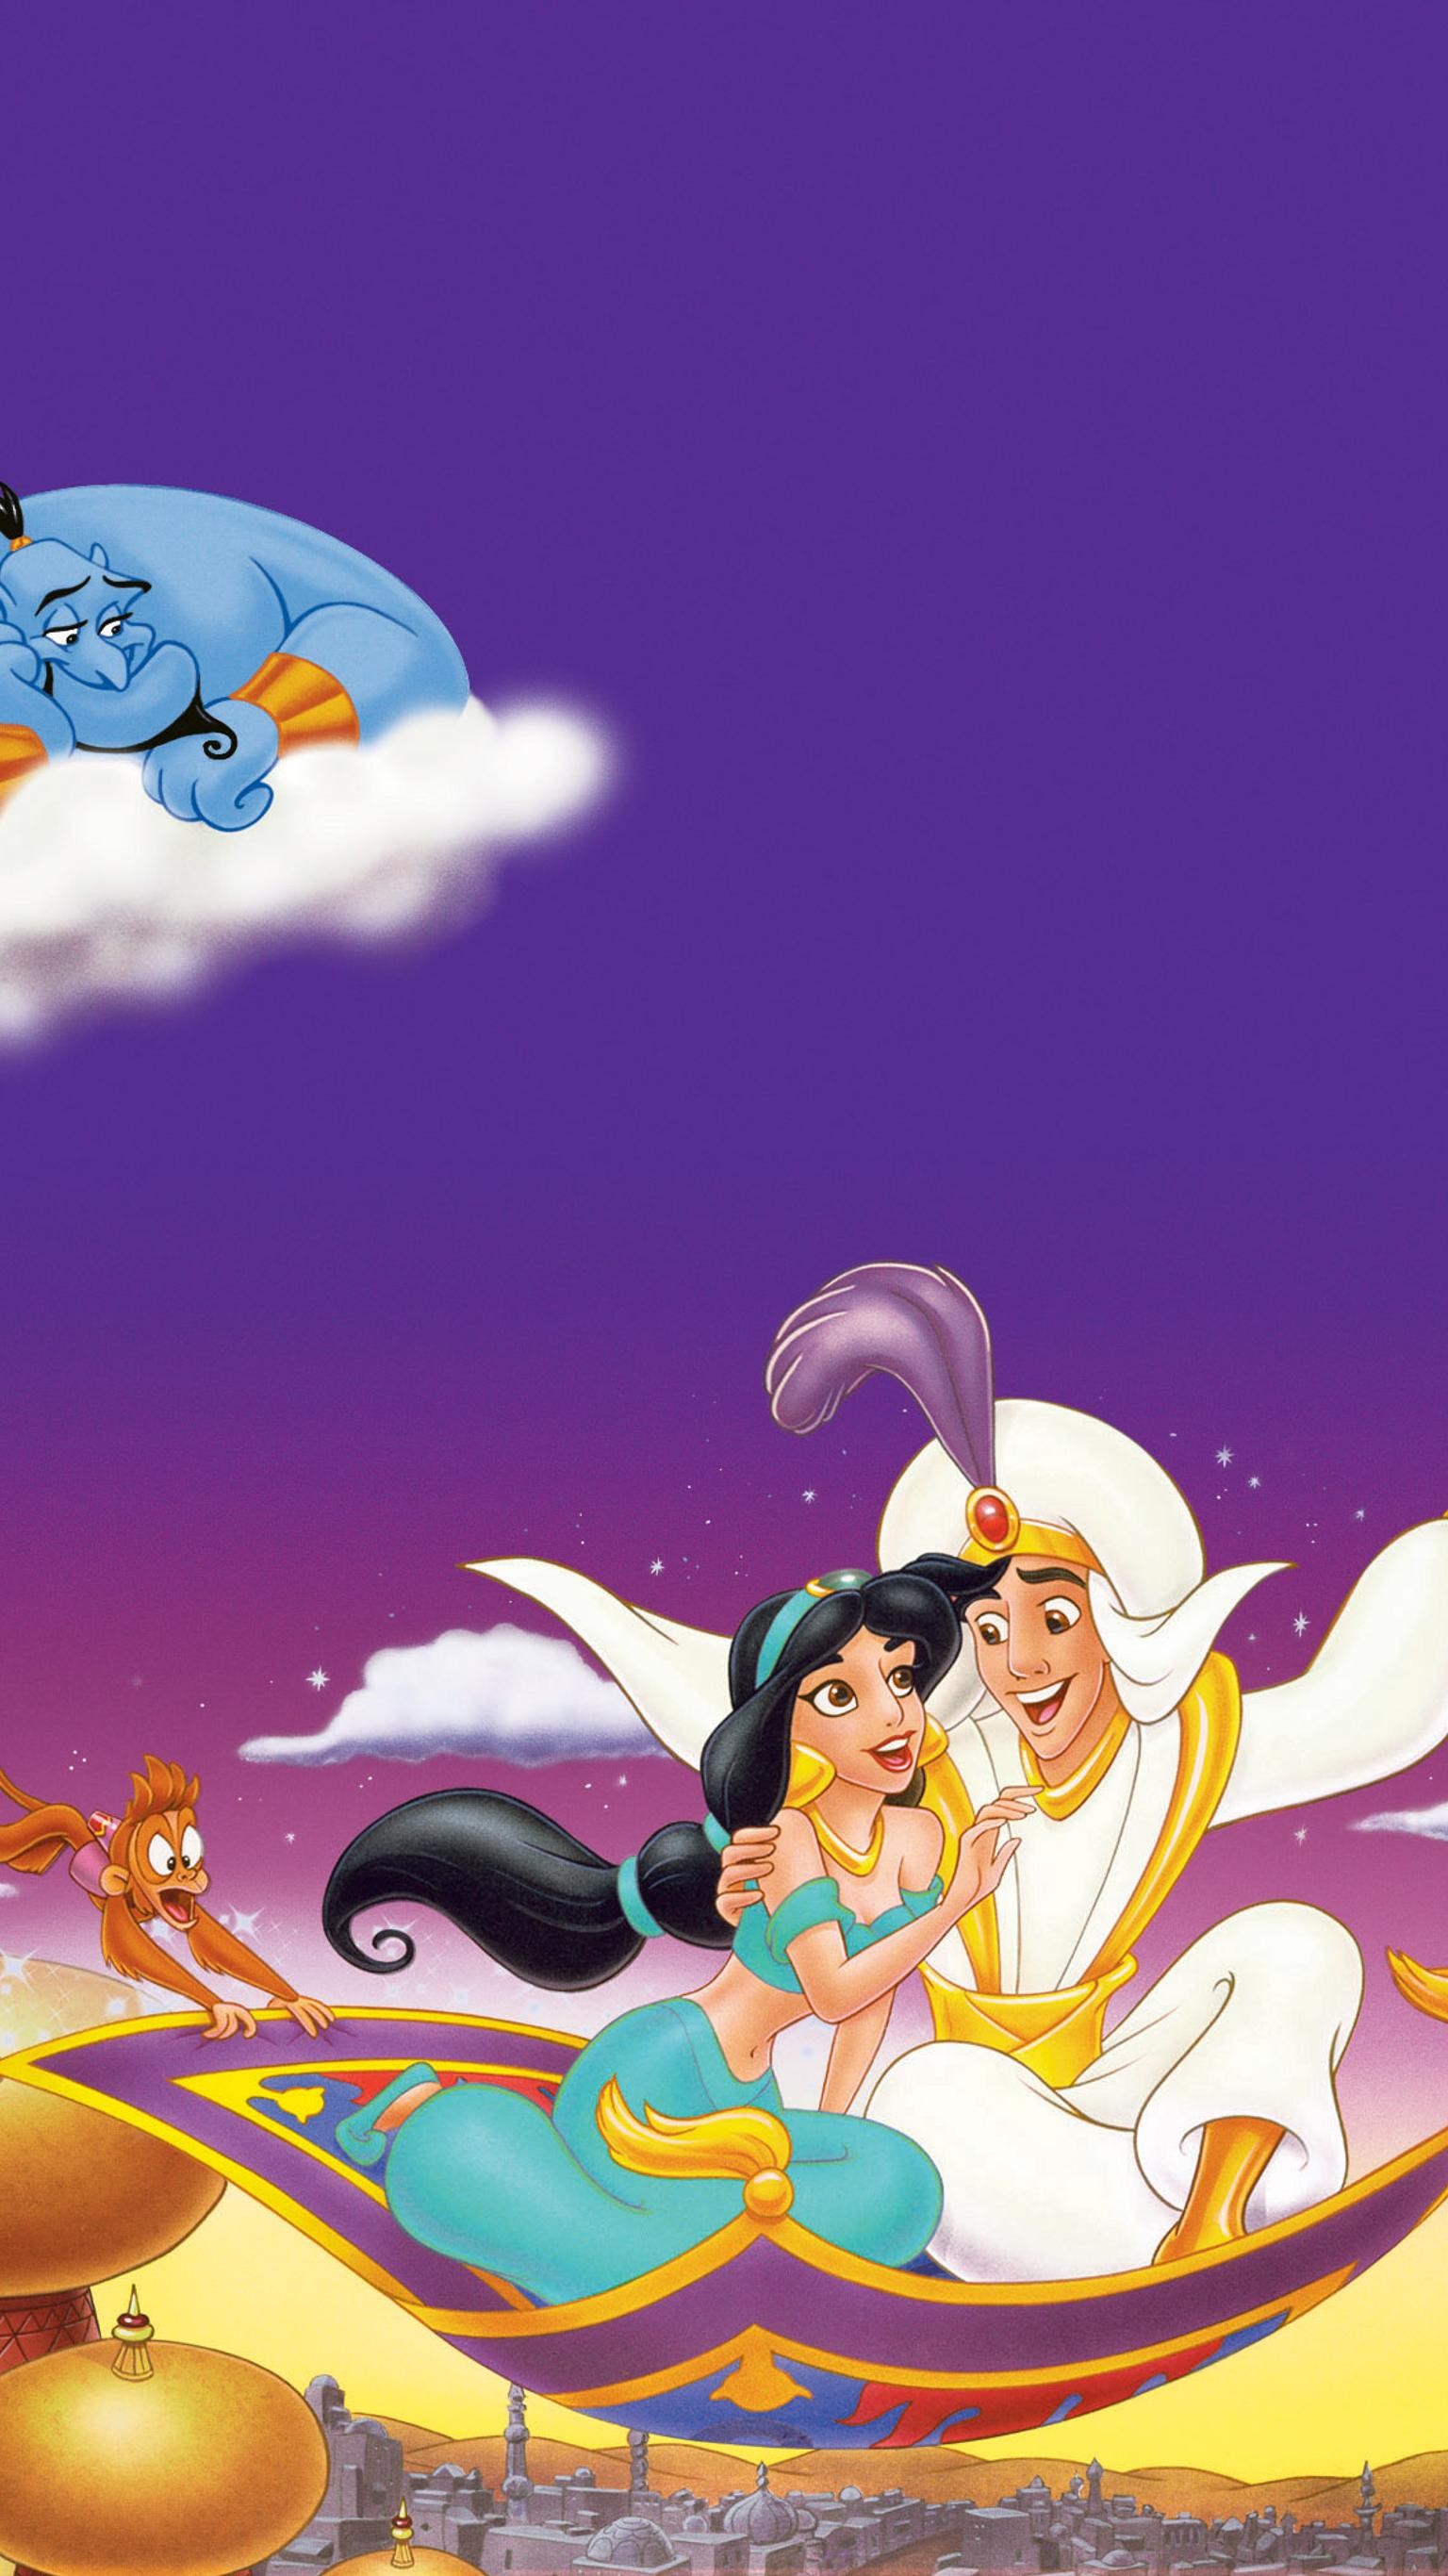 20 Aladdin 2019 HD Wallpapers and Backgrounds